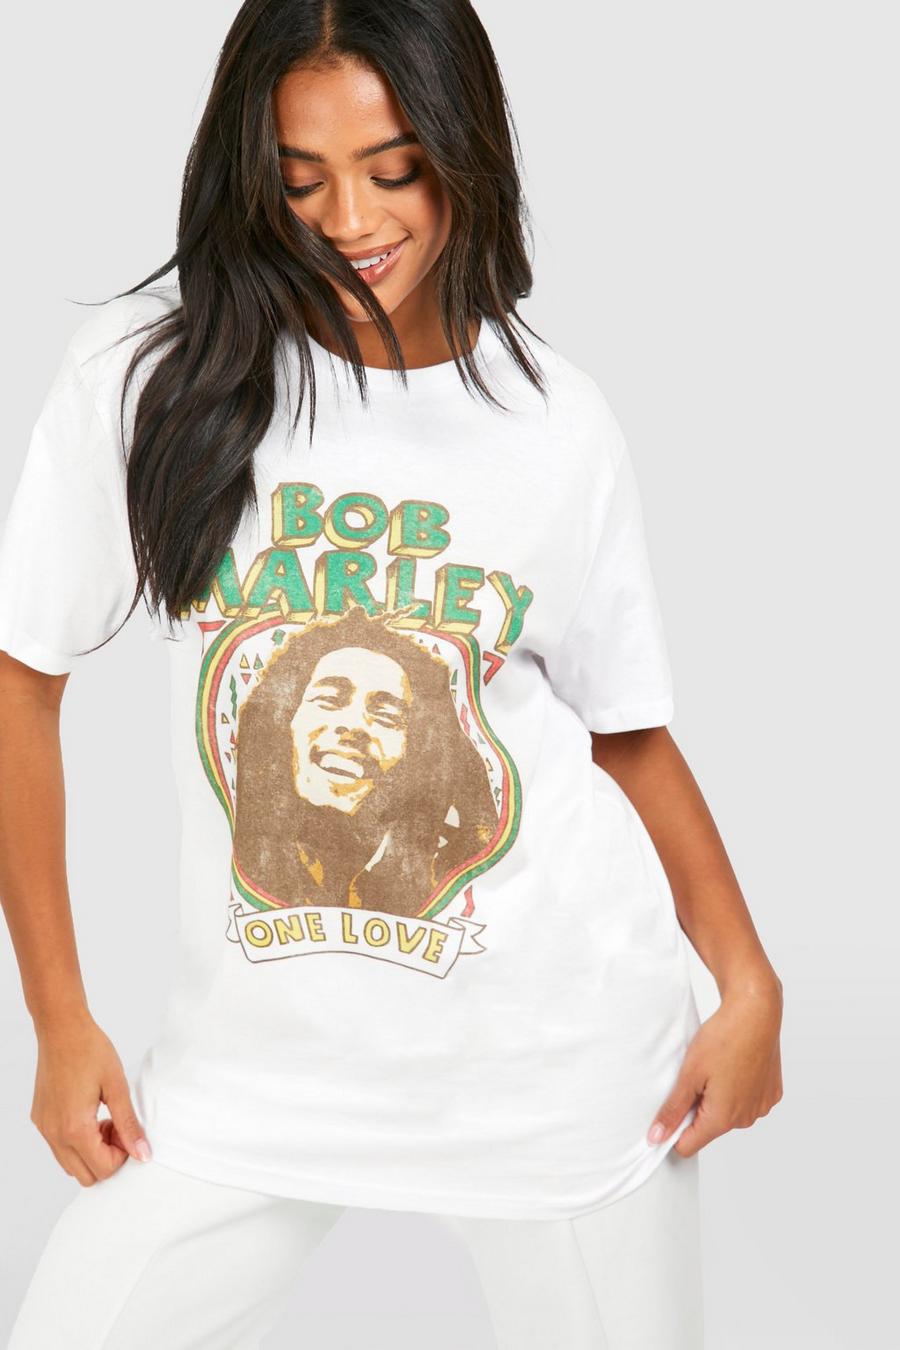 T-shirt oversize ufficiale con stampa Bob Marley One Love, White